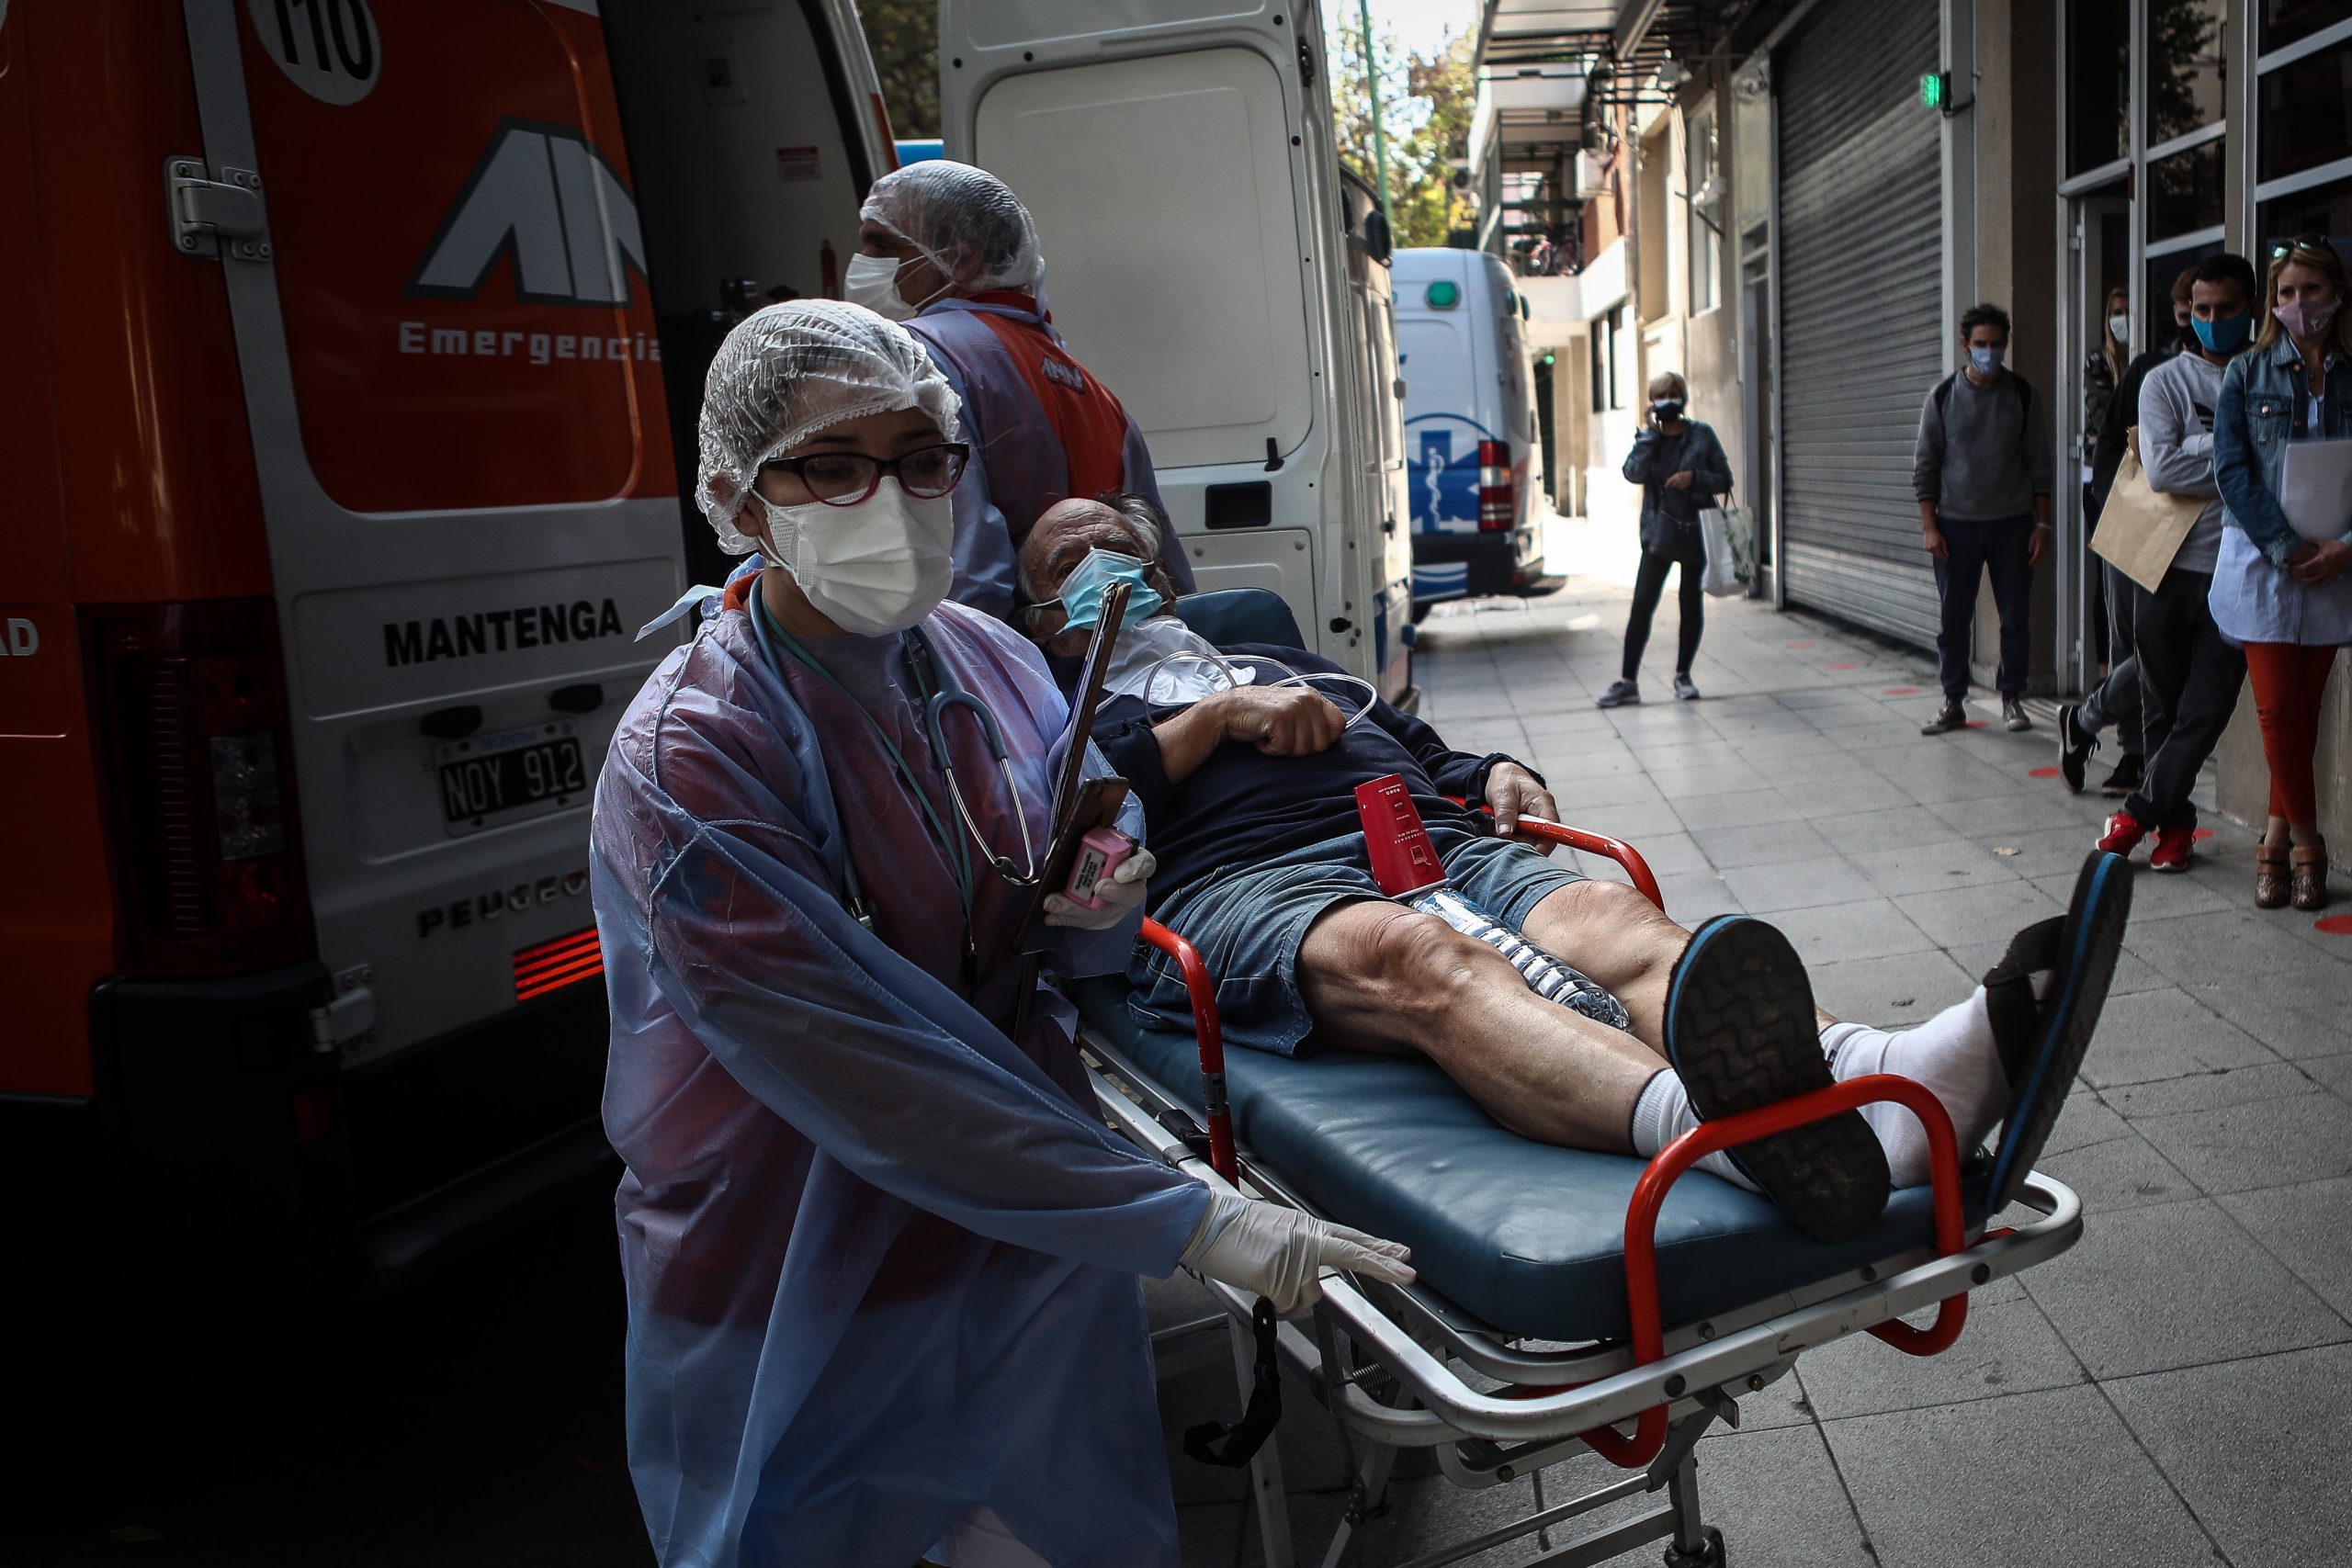 epa09162406 Paramedics admit a covid-19 patient to a hospital in Buenos Aires, Argentina, 26 April 2021. The South American country begins to feel the consequences of the second wave of the pandemic with cases tripling in just one month.  EPA/Juan Ignacio Roncoroni